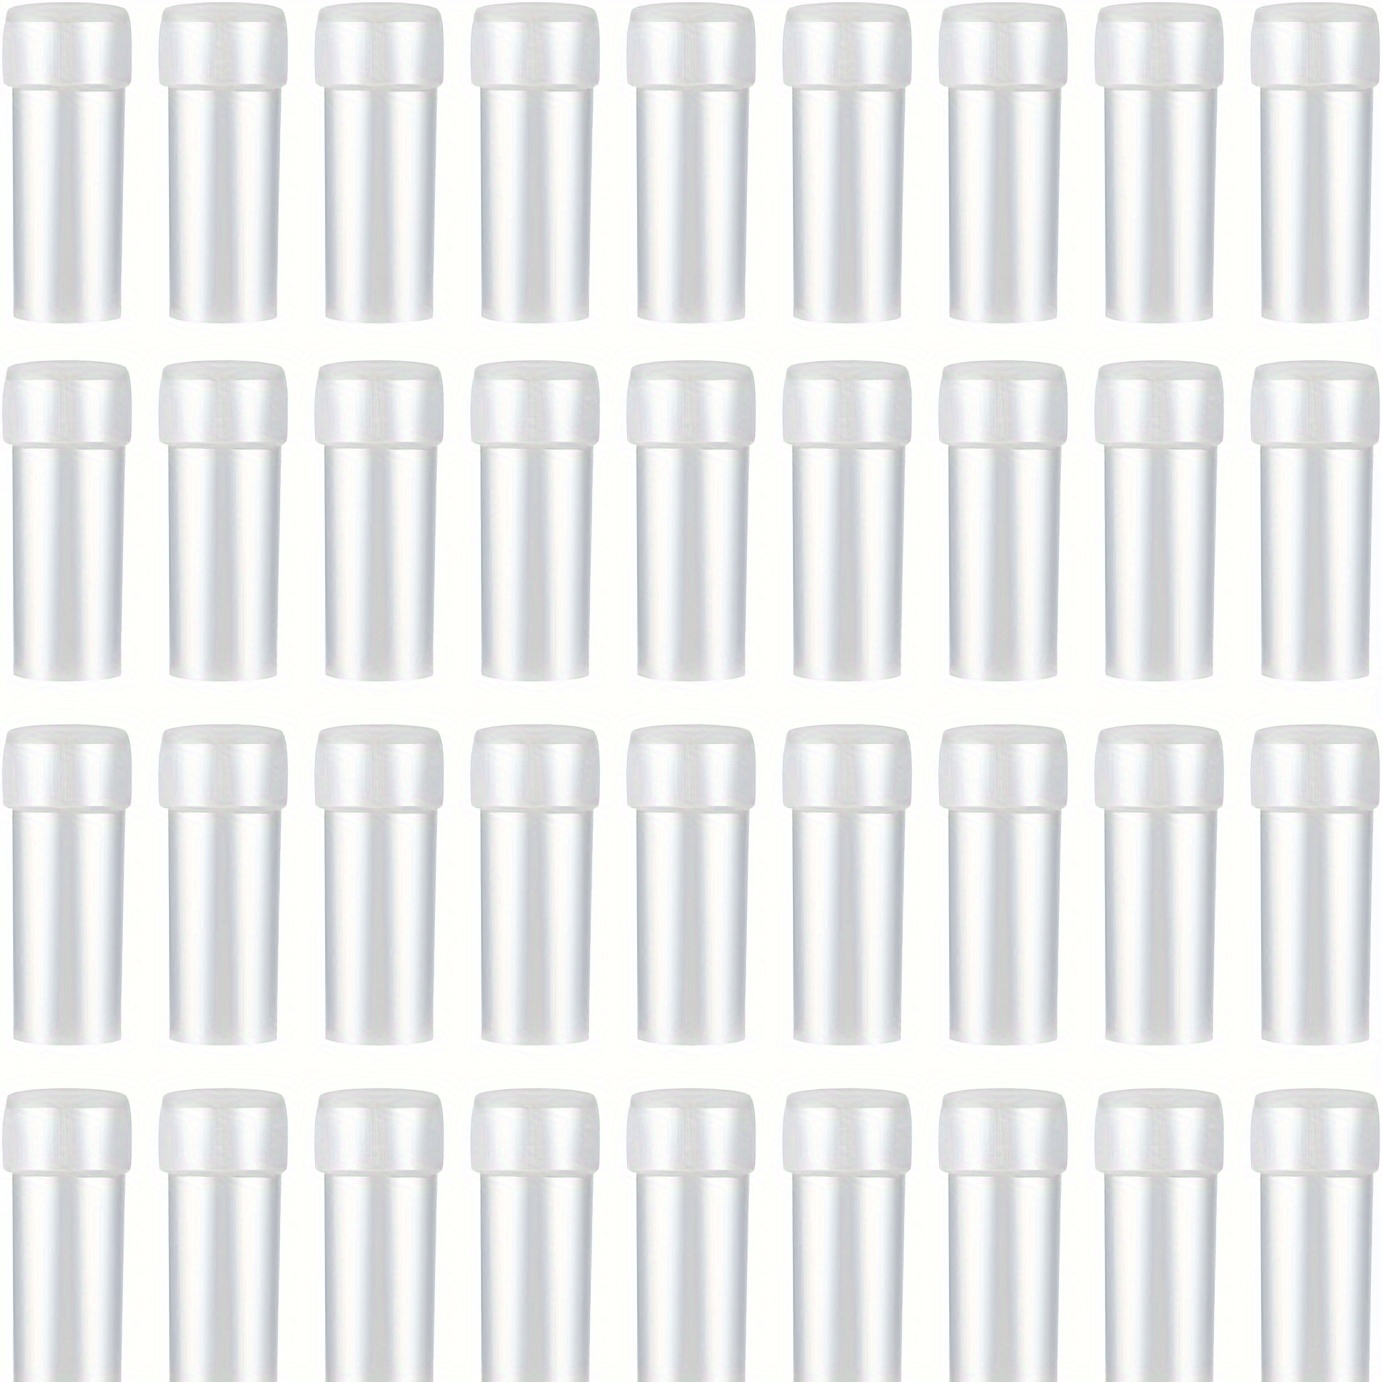 

50/100pcs 5ml Plastic Pill Containers, Transparent Empty Pill Bottles Sample Vial Tubes With Caps For Pills, Beads Storage, Easy To Use With Writing Area